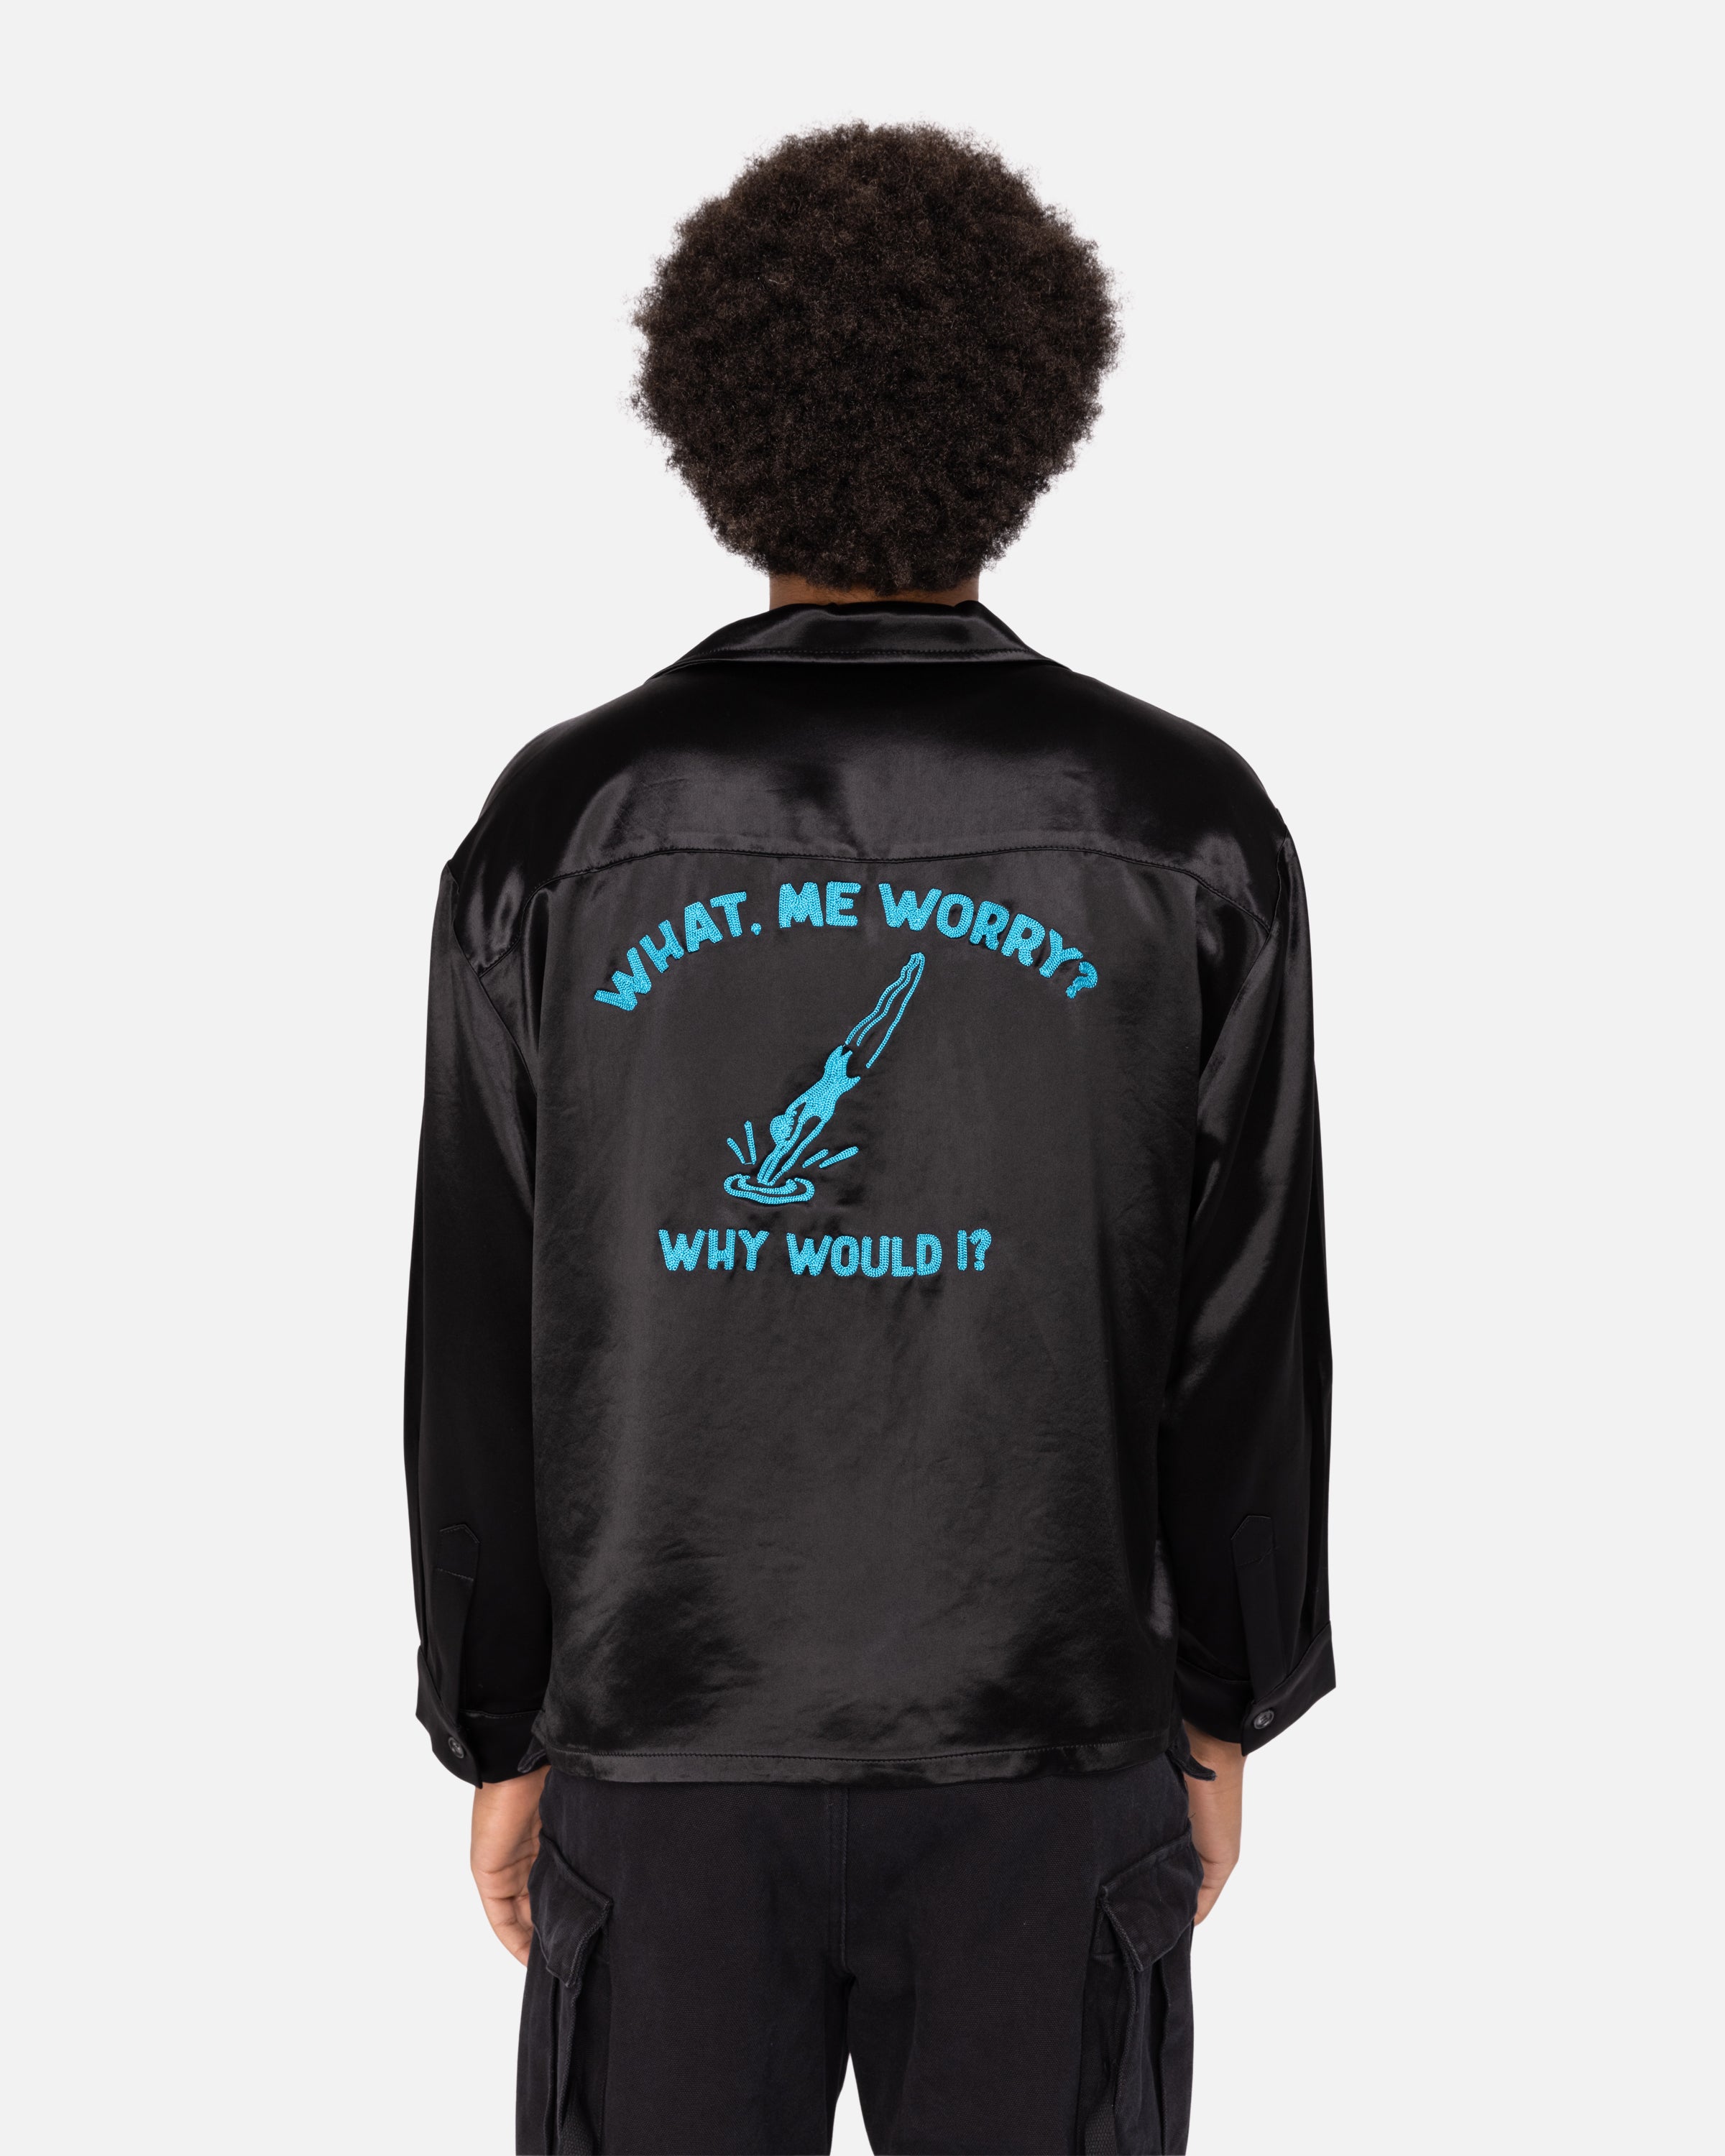 'What, Me Worry?' Acetate Bowling Shirt